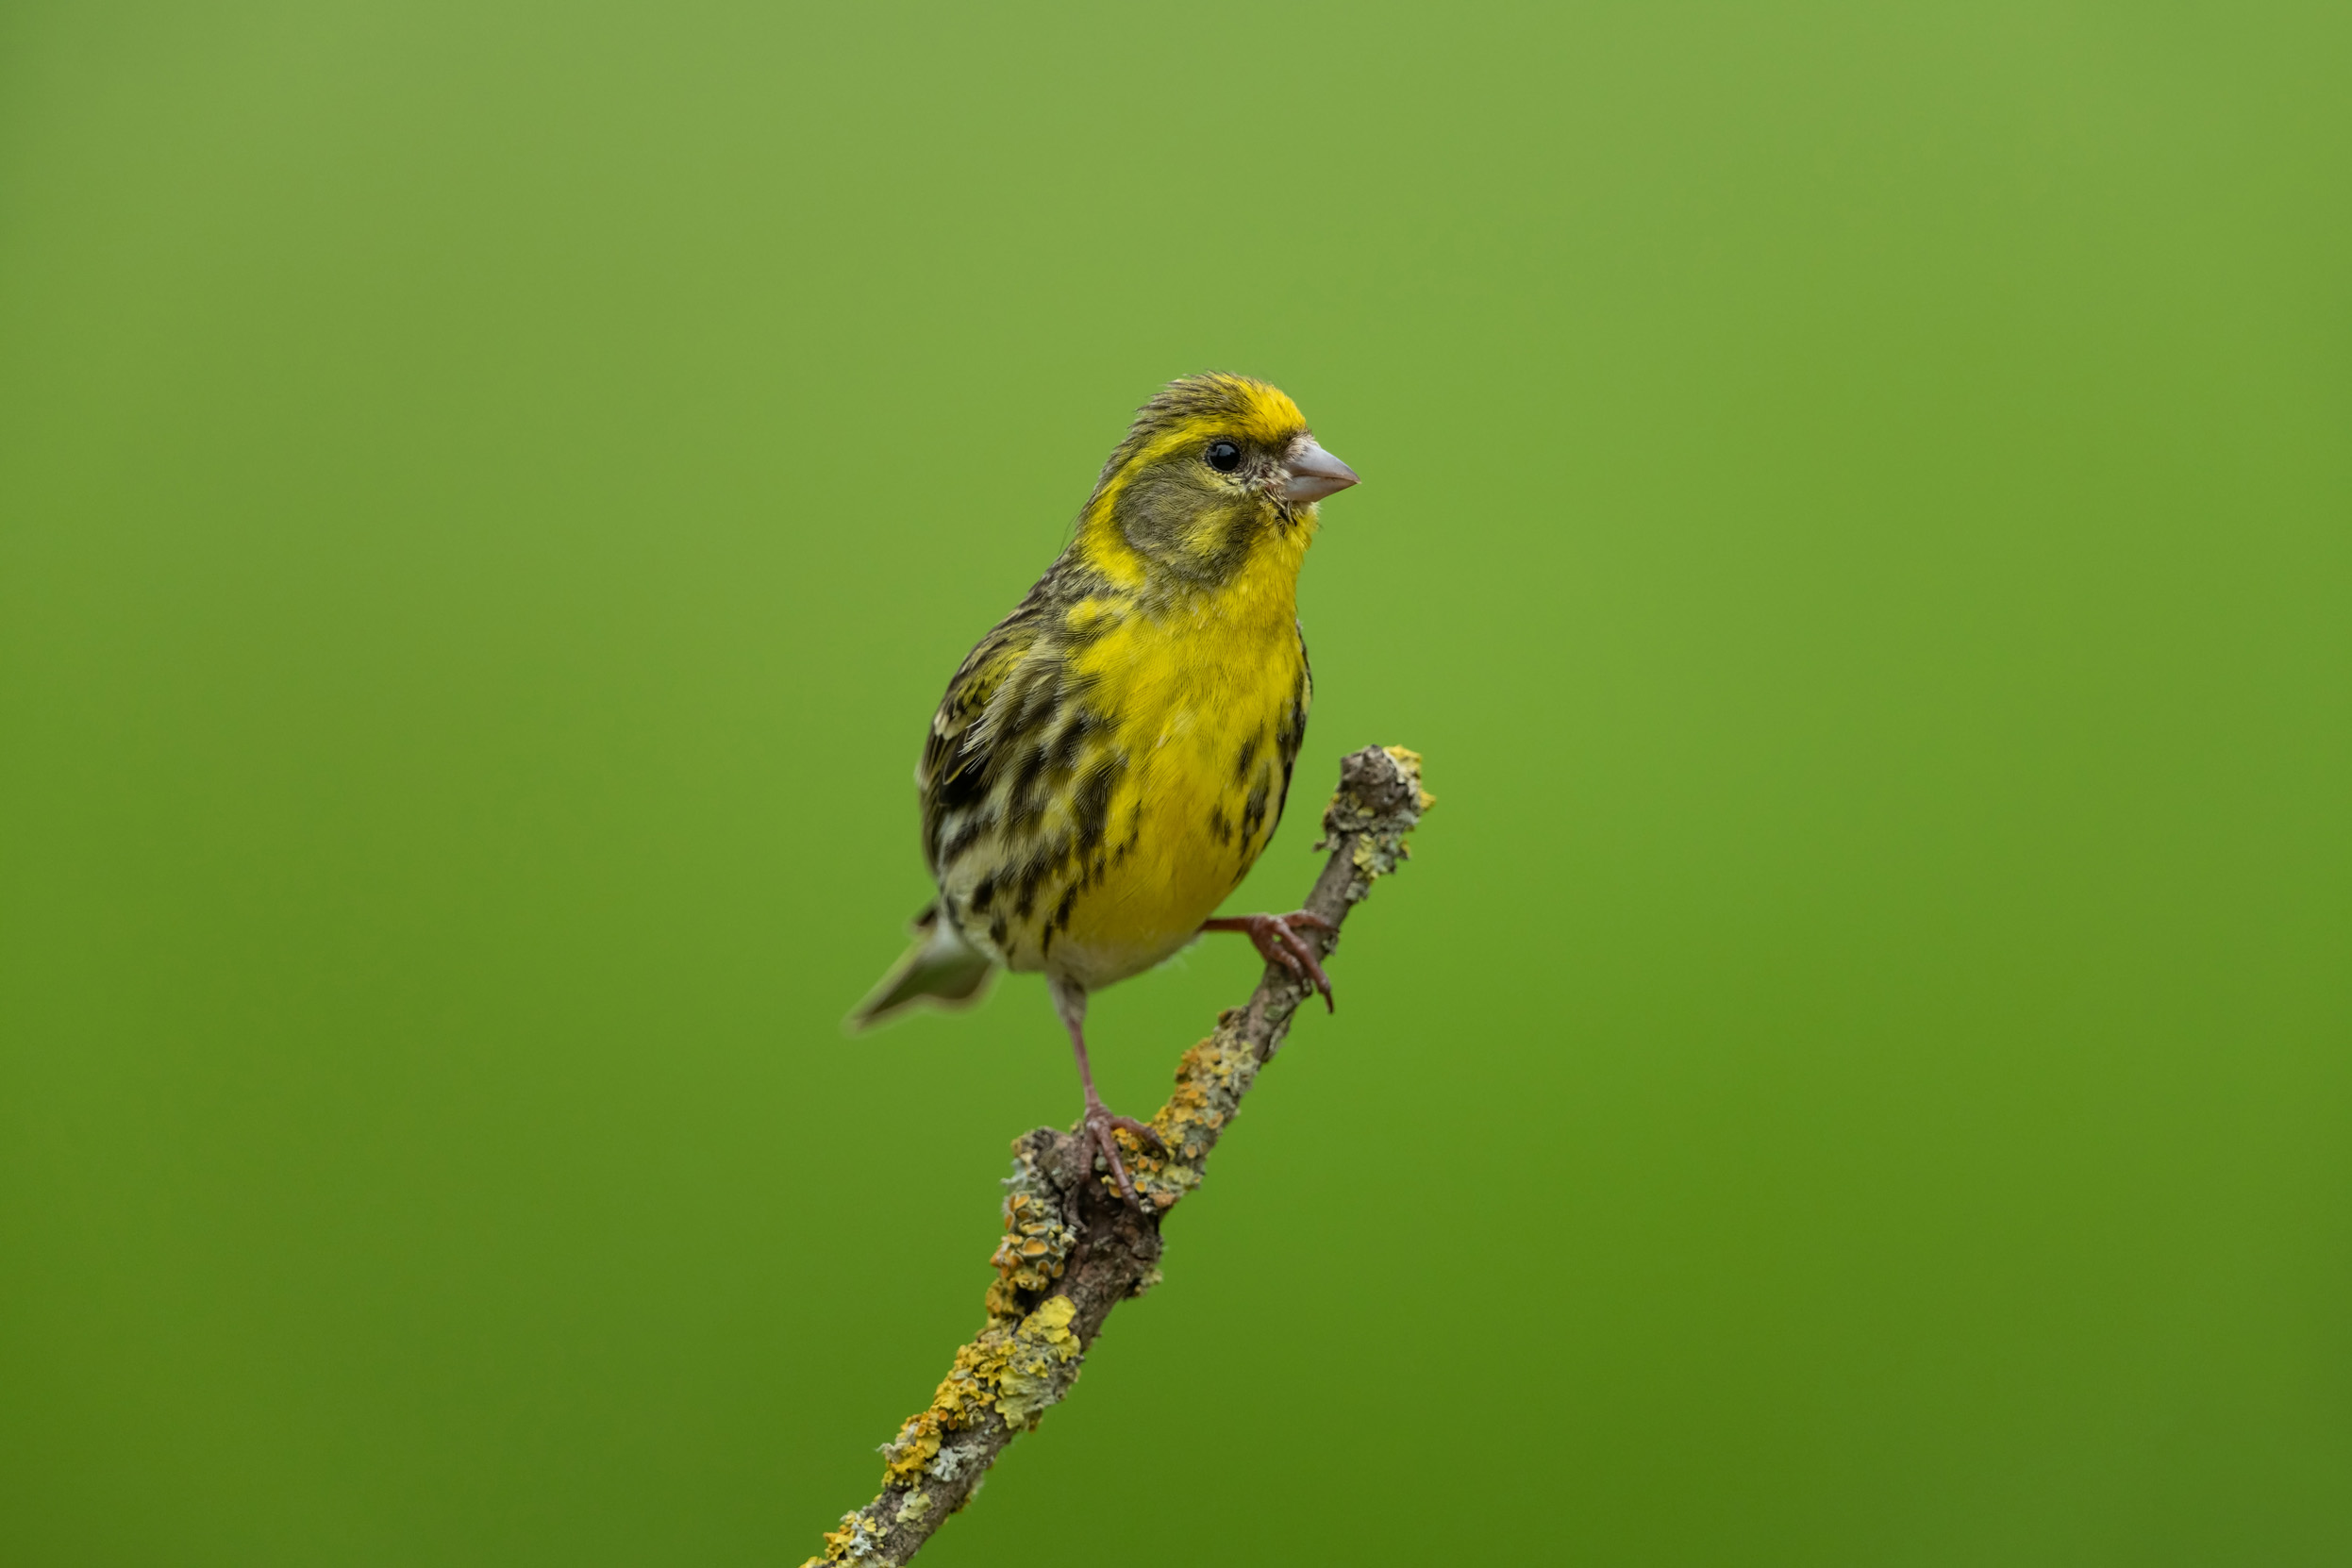 A lone Serin perched on a branch.